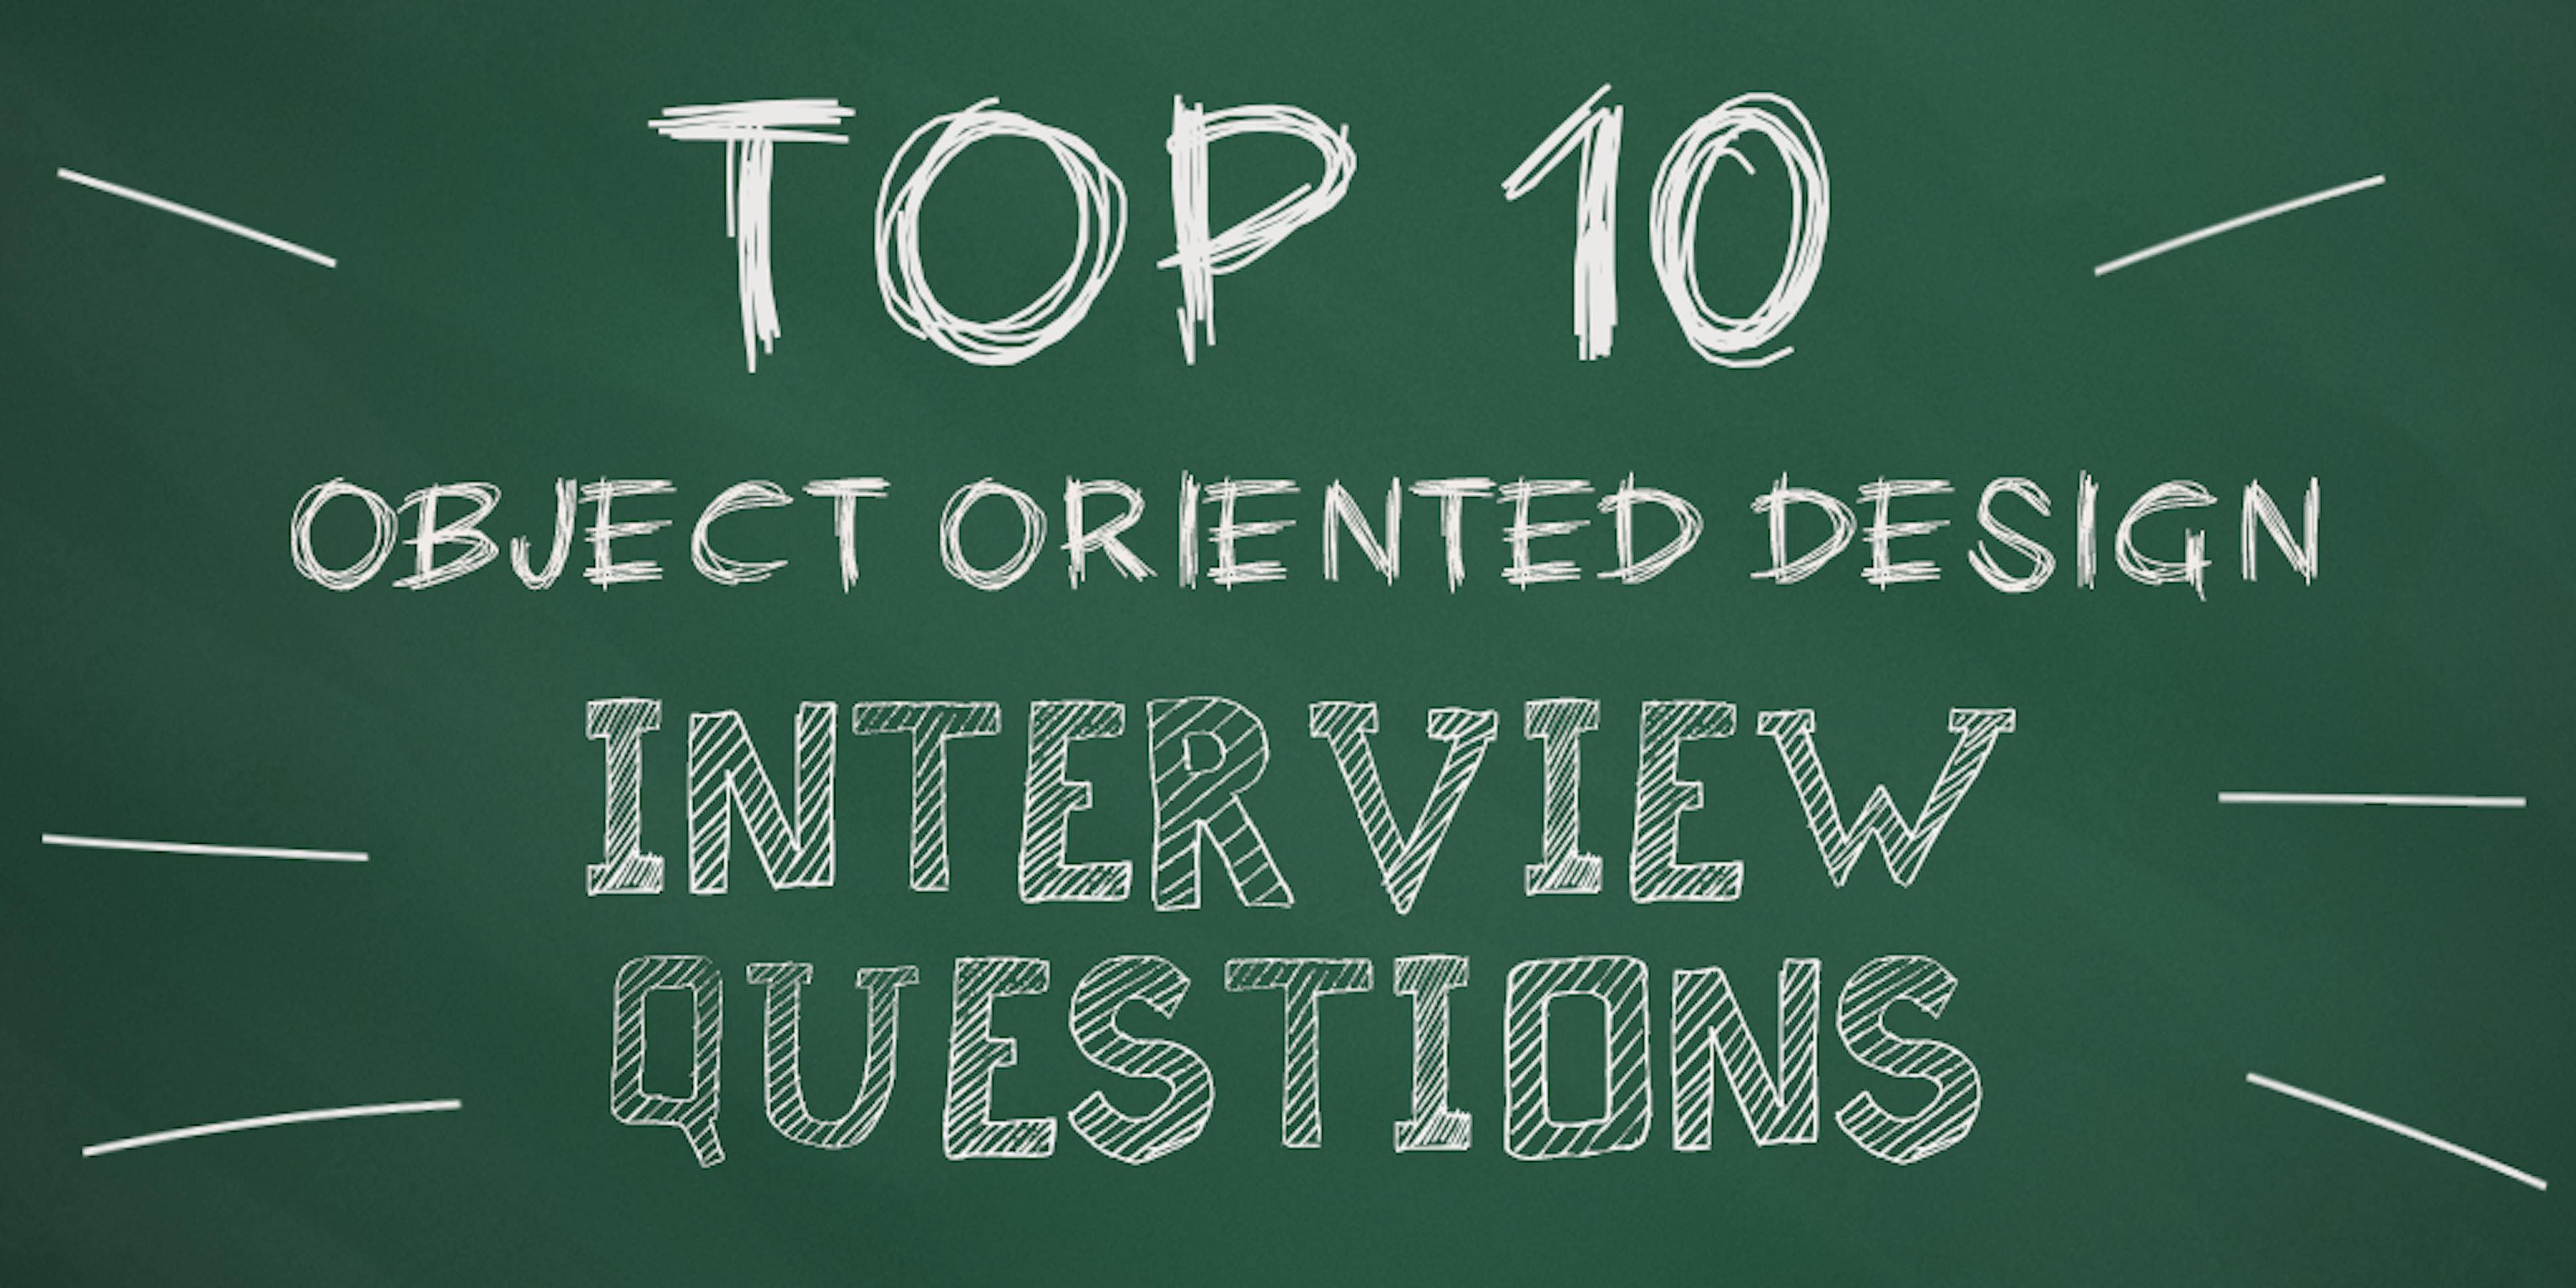 /the-top-10-object-oriented-design-interview-questions-developers-should-know-c7fc2e13ce39 feature image